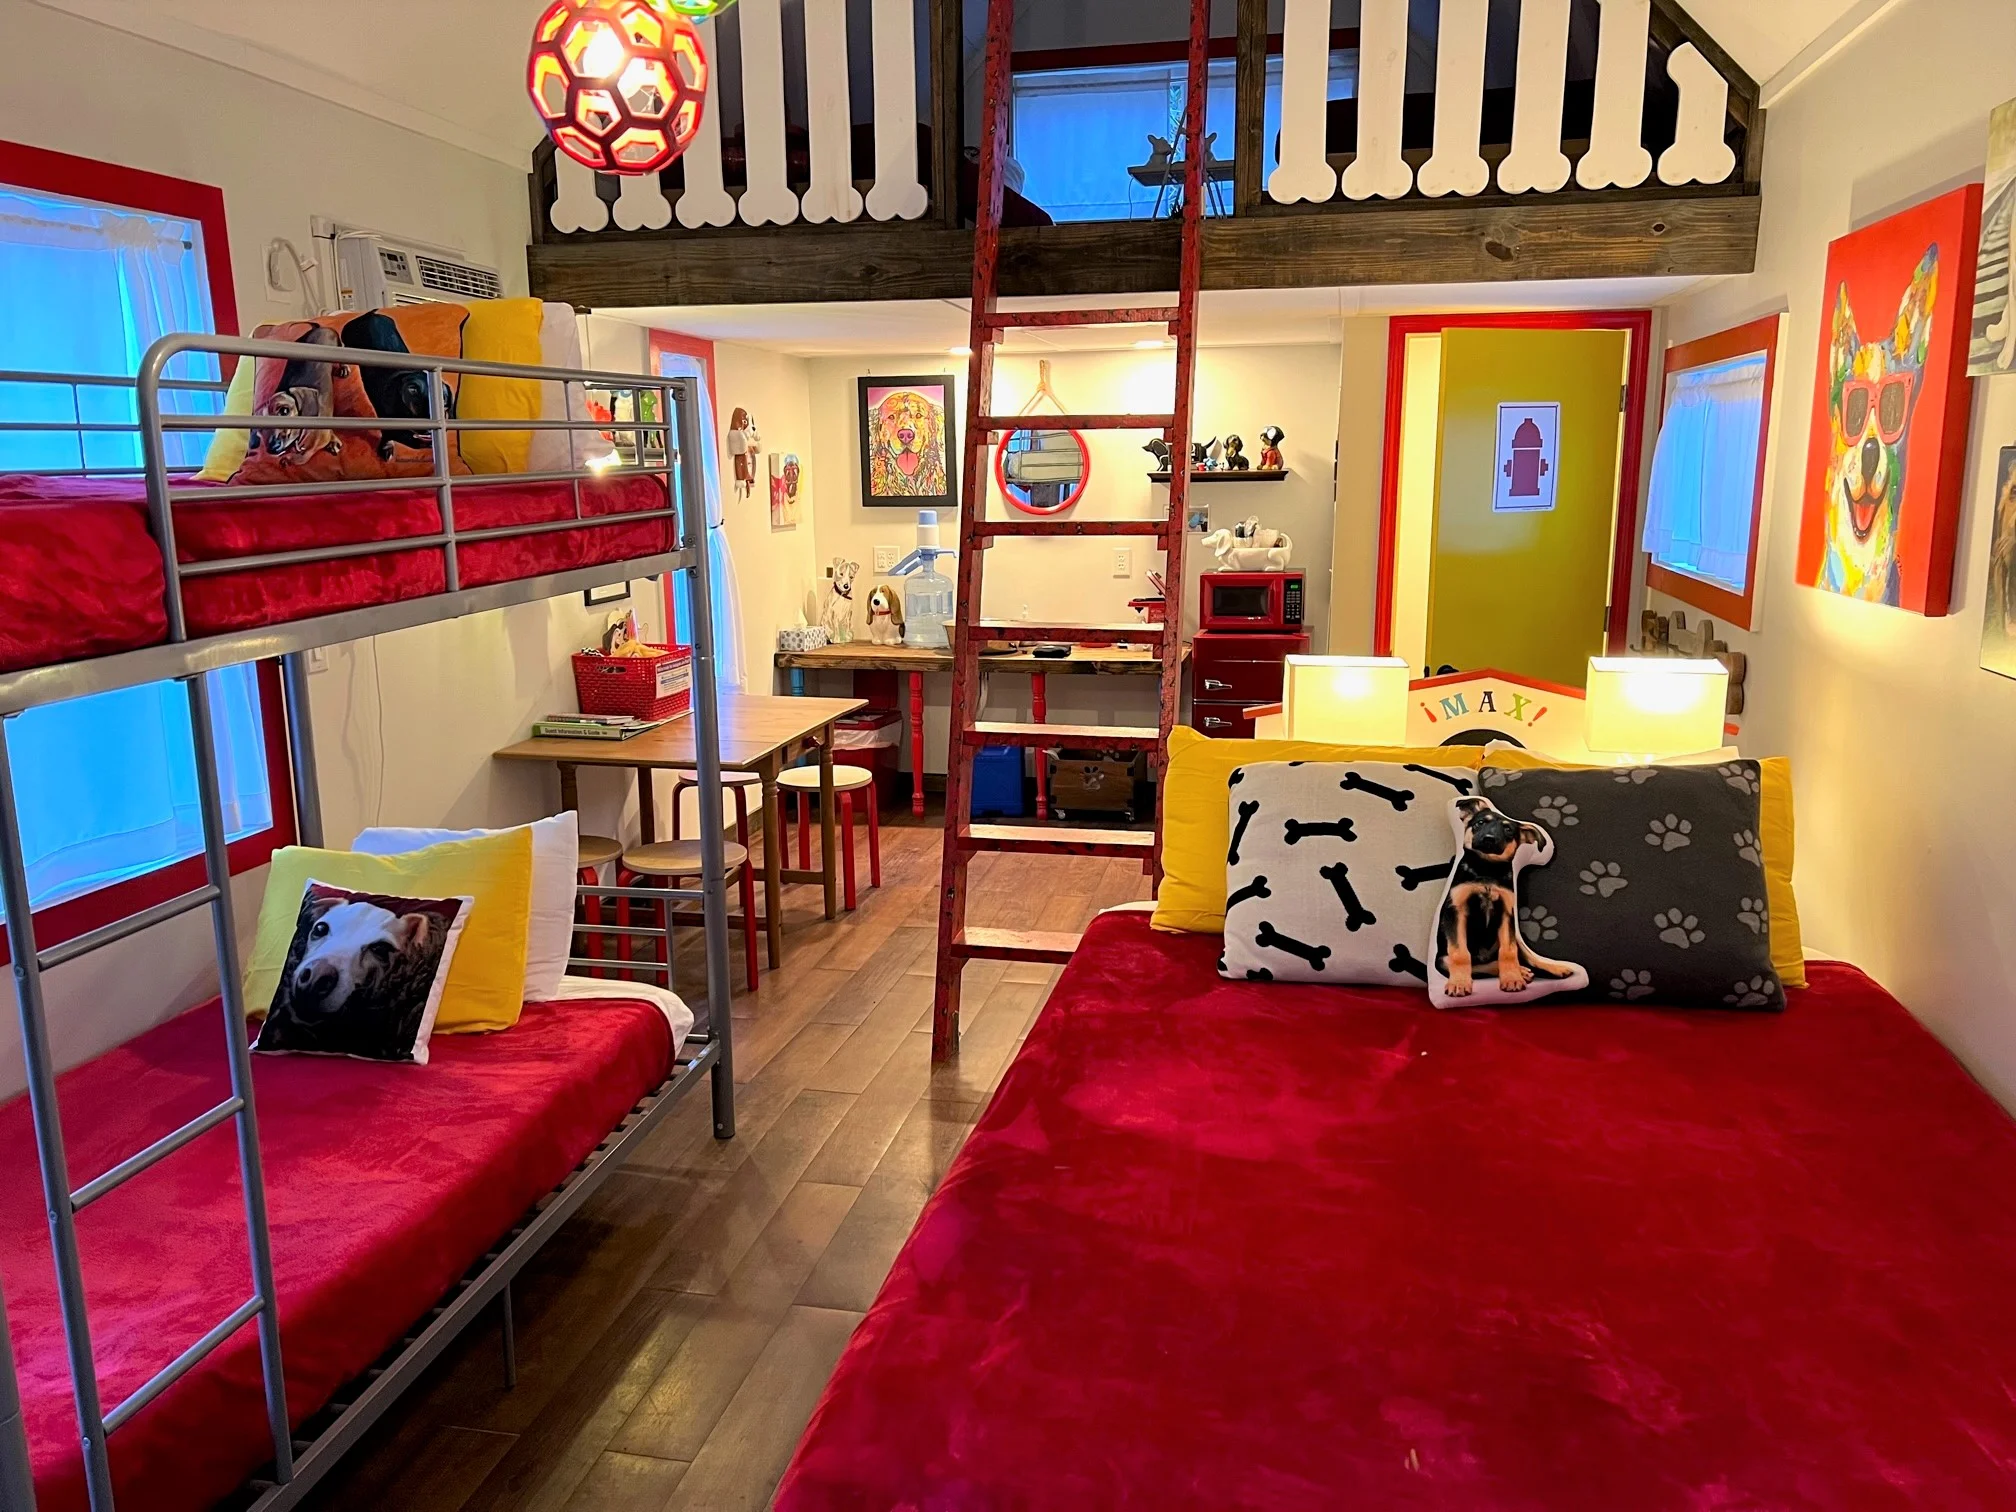 Inside of the Red Woof Inn with beds for six